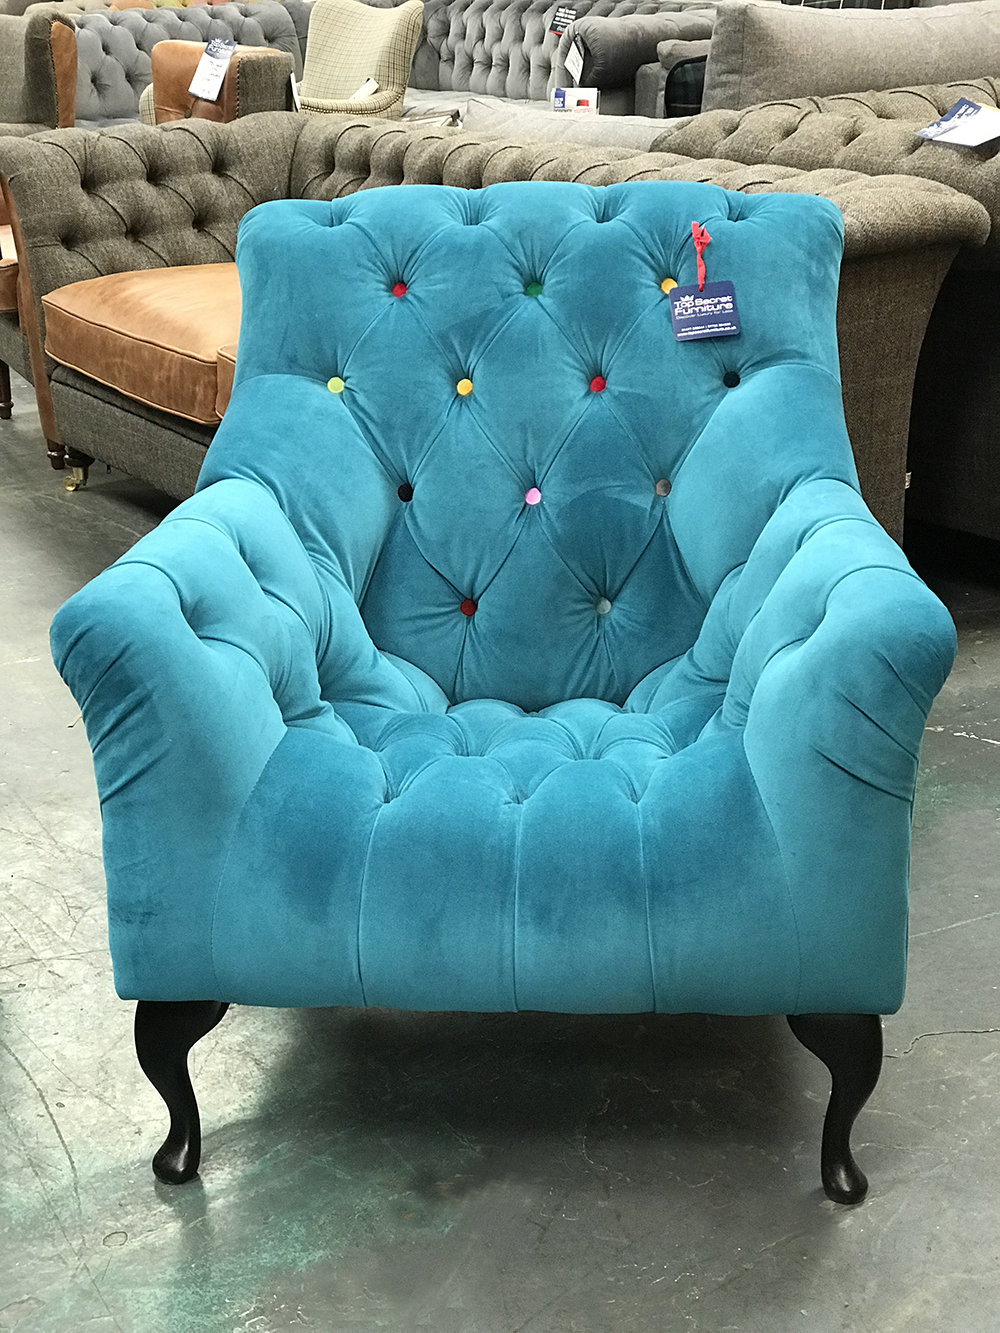 Mr Bright Chair from Top Secret Furniture Cheshire